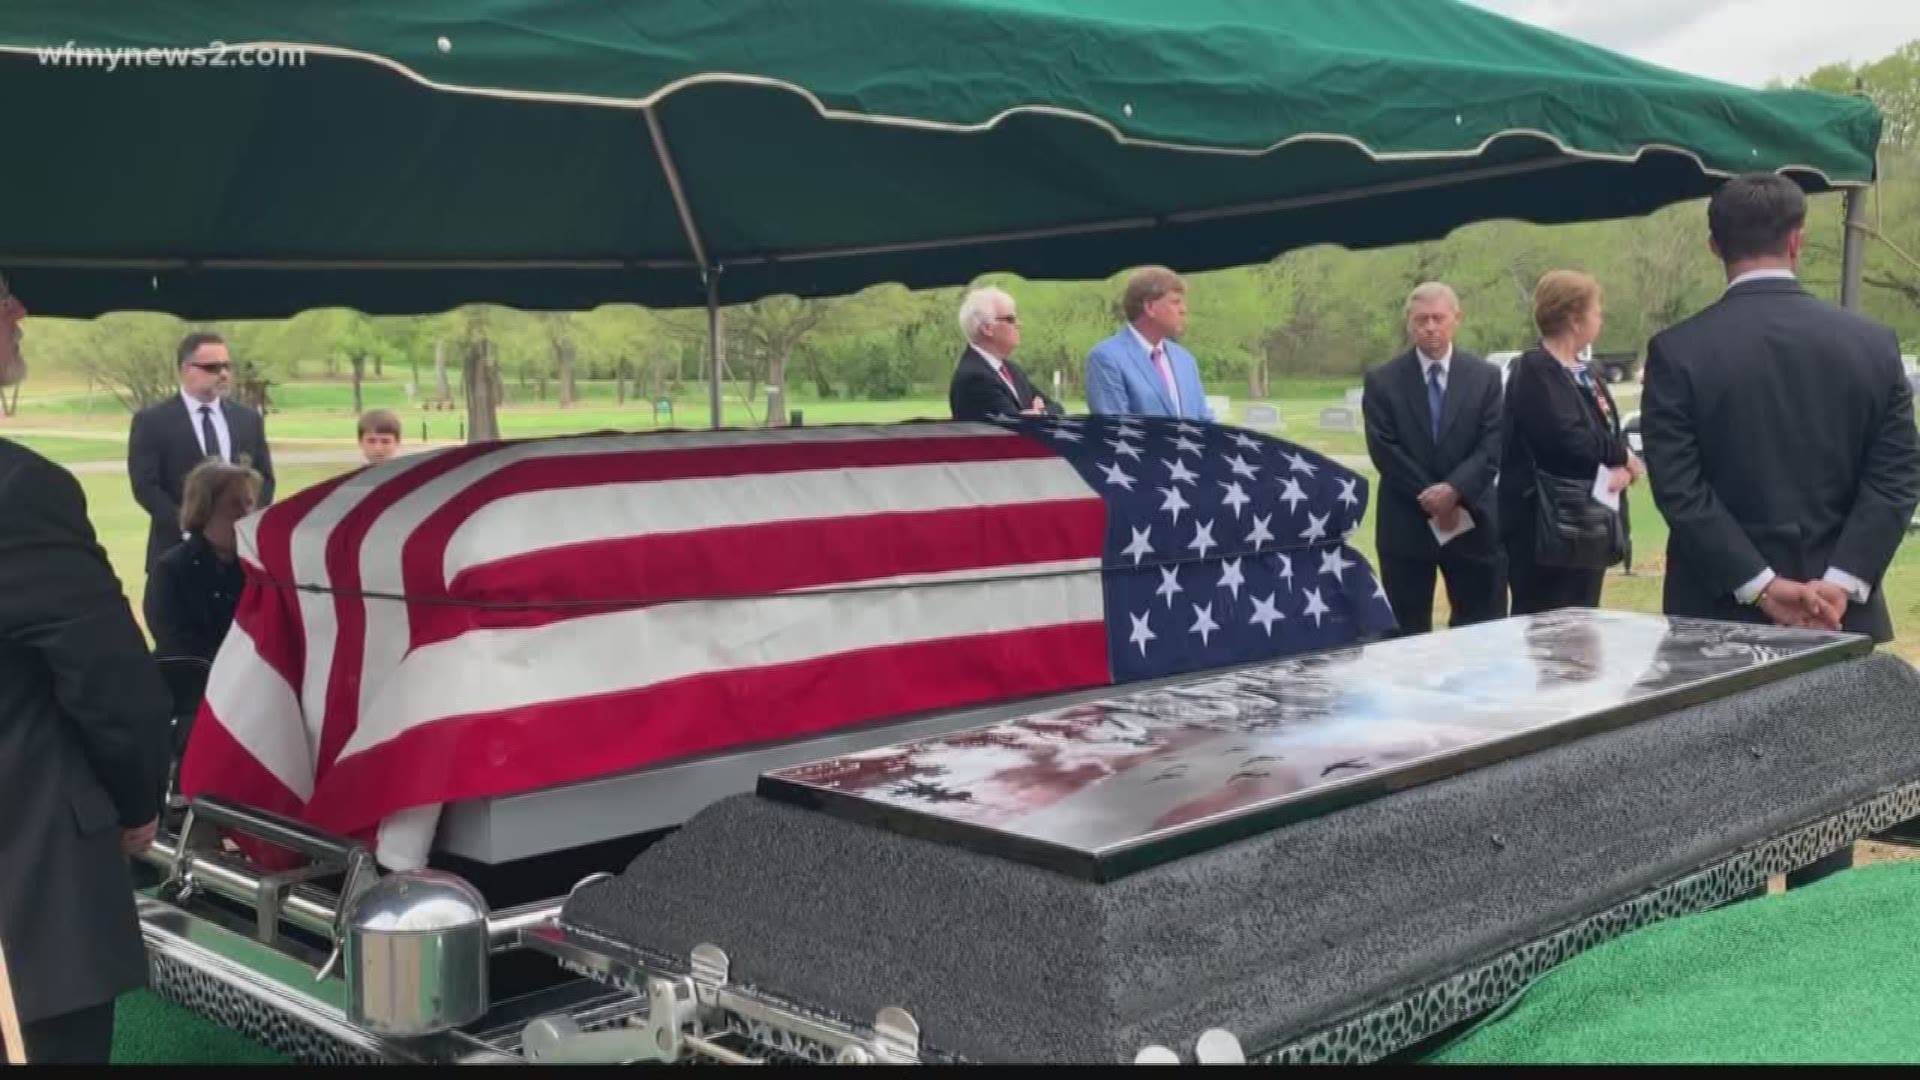 Many events we enjoy have either changed or been postponed because of coronavirus. Some events are irreplaceable. Triad families share how military funeral ceremony